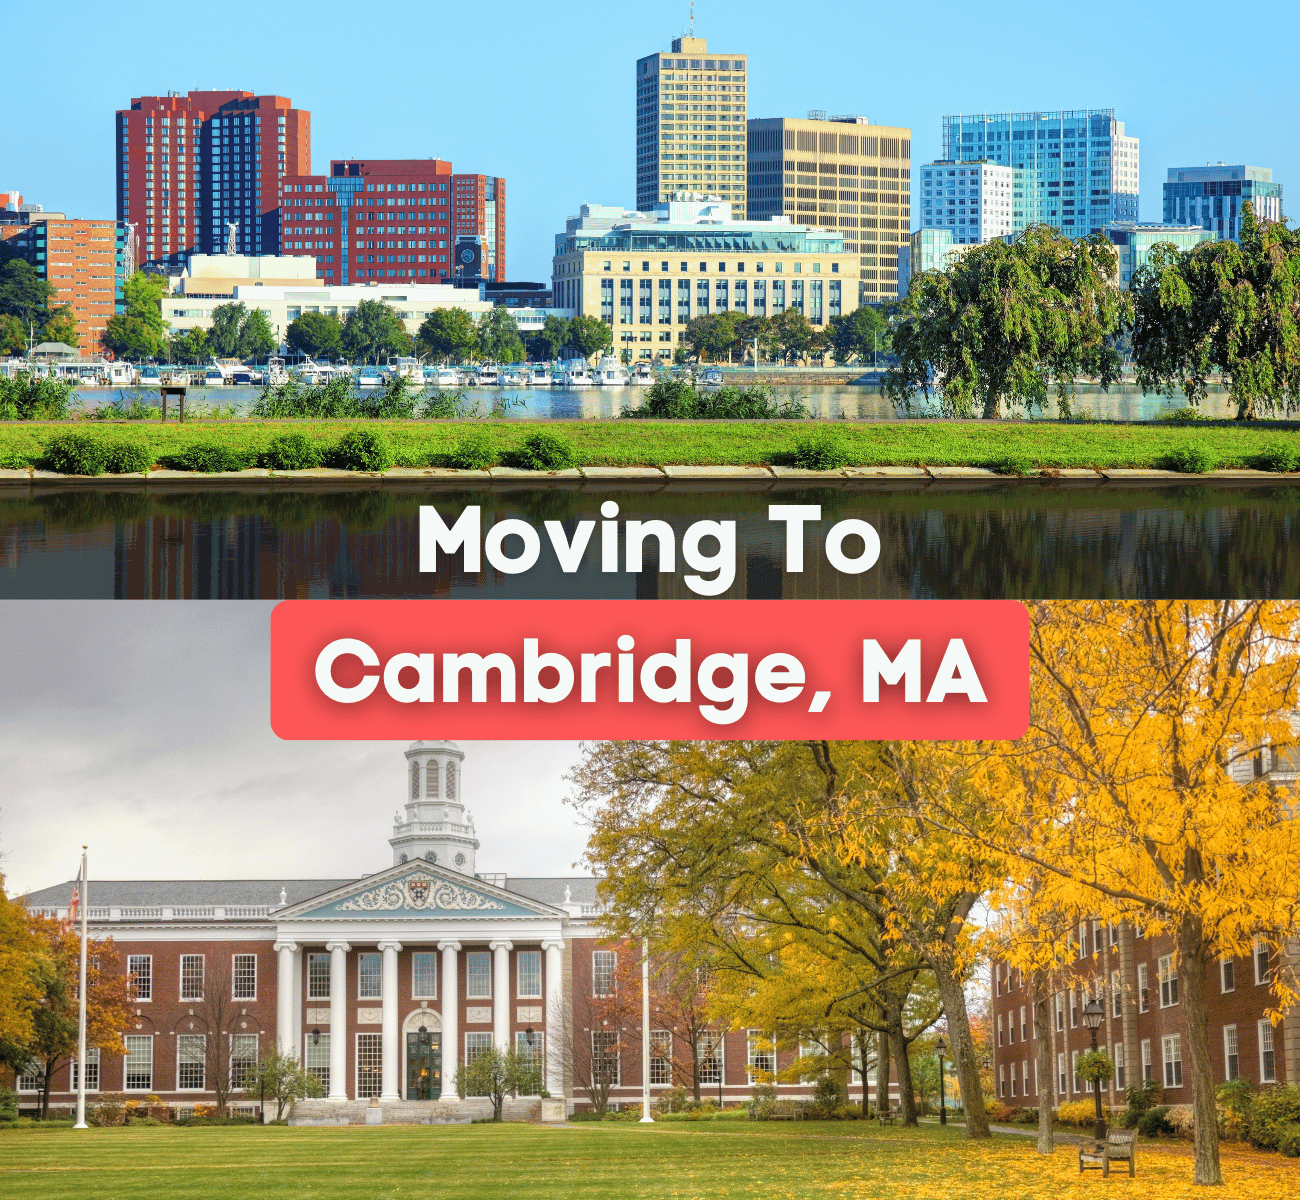 Moving to Cambridge, MA - city of Cambridge and Harvard buildings 